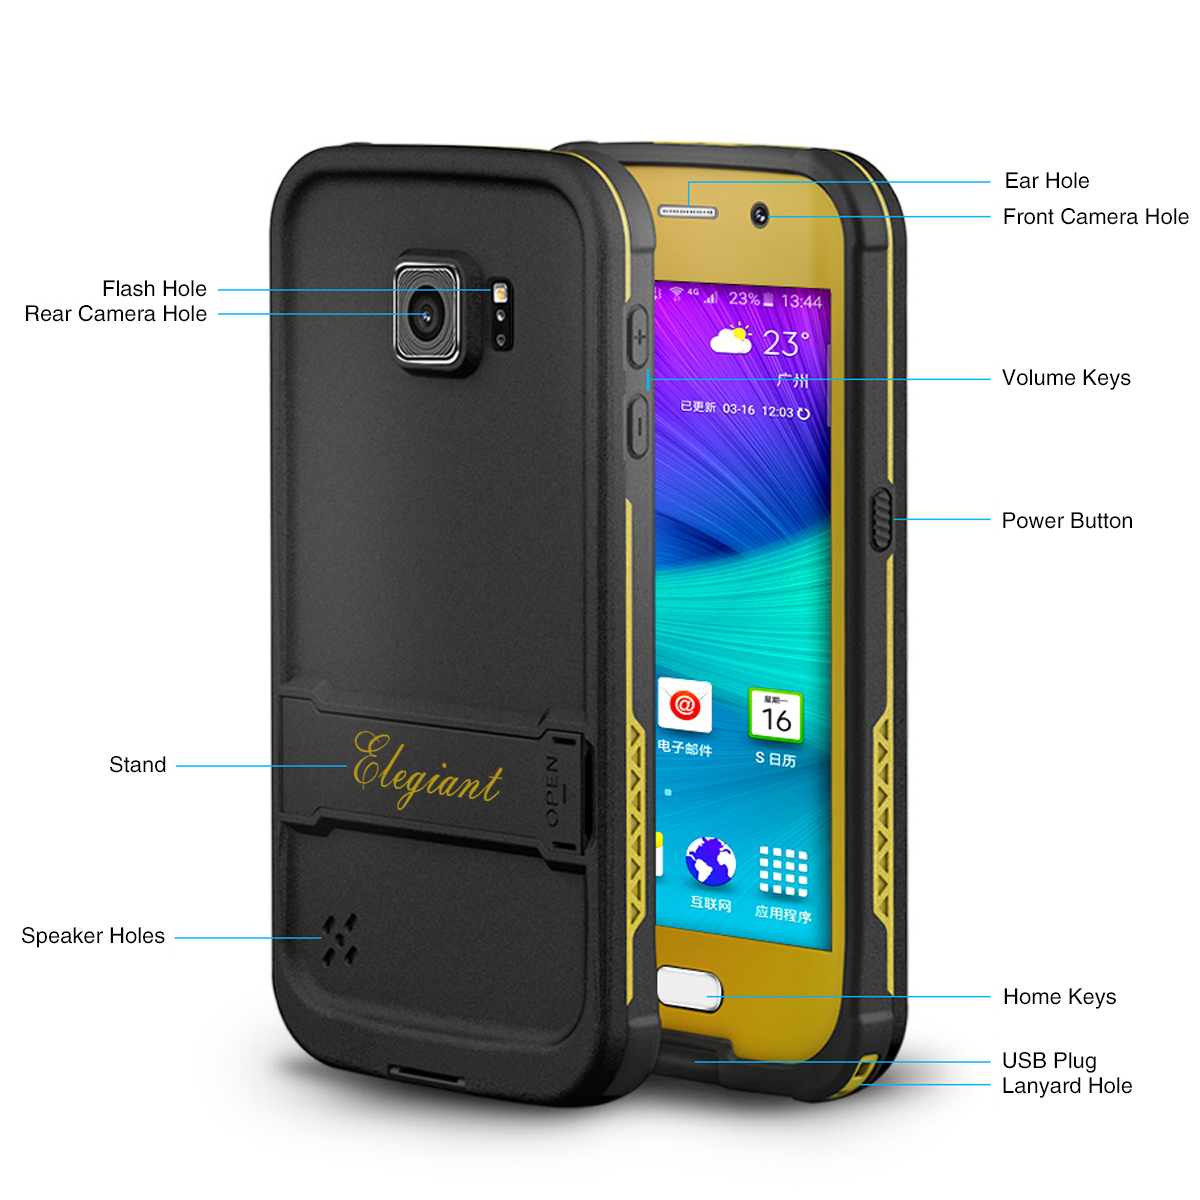 ELEGIANT-for-Samsung-S6-Waterproof-Case-Transparent-Touch-Screen-Shockproof-Full-Cover-Protective-Ca-1890798-4